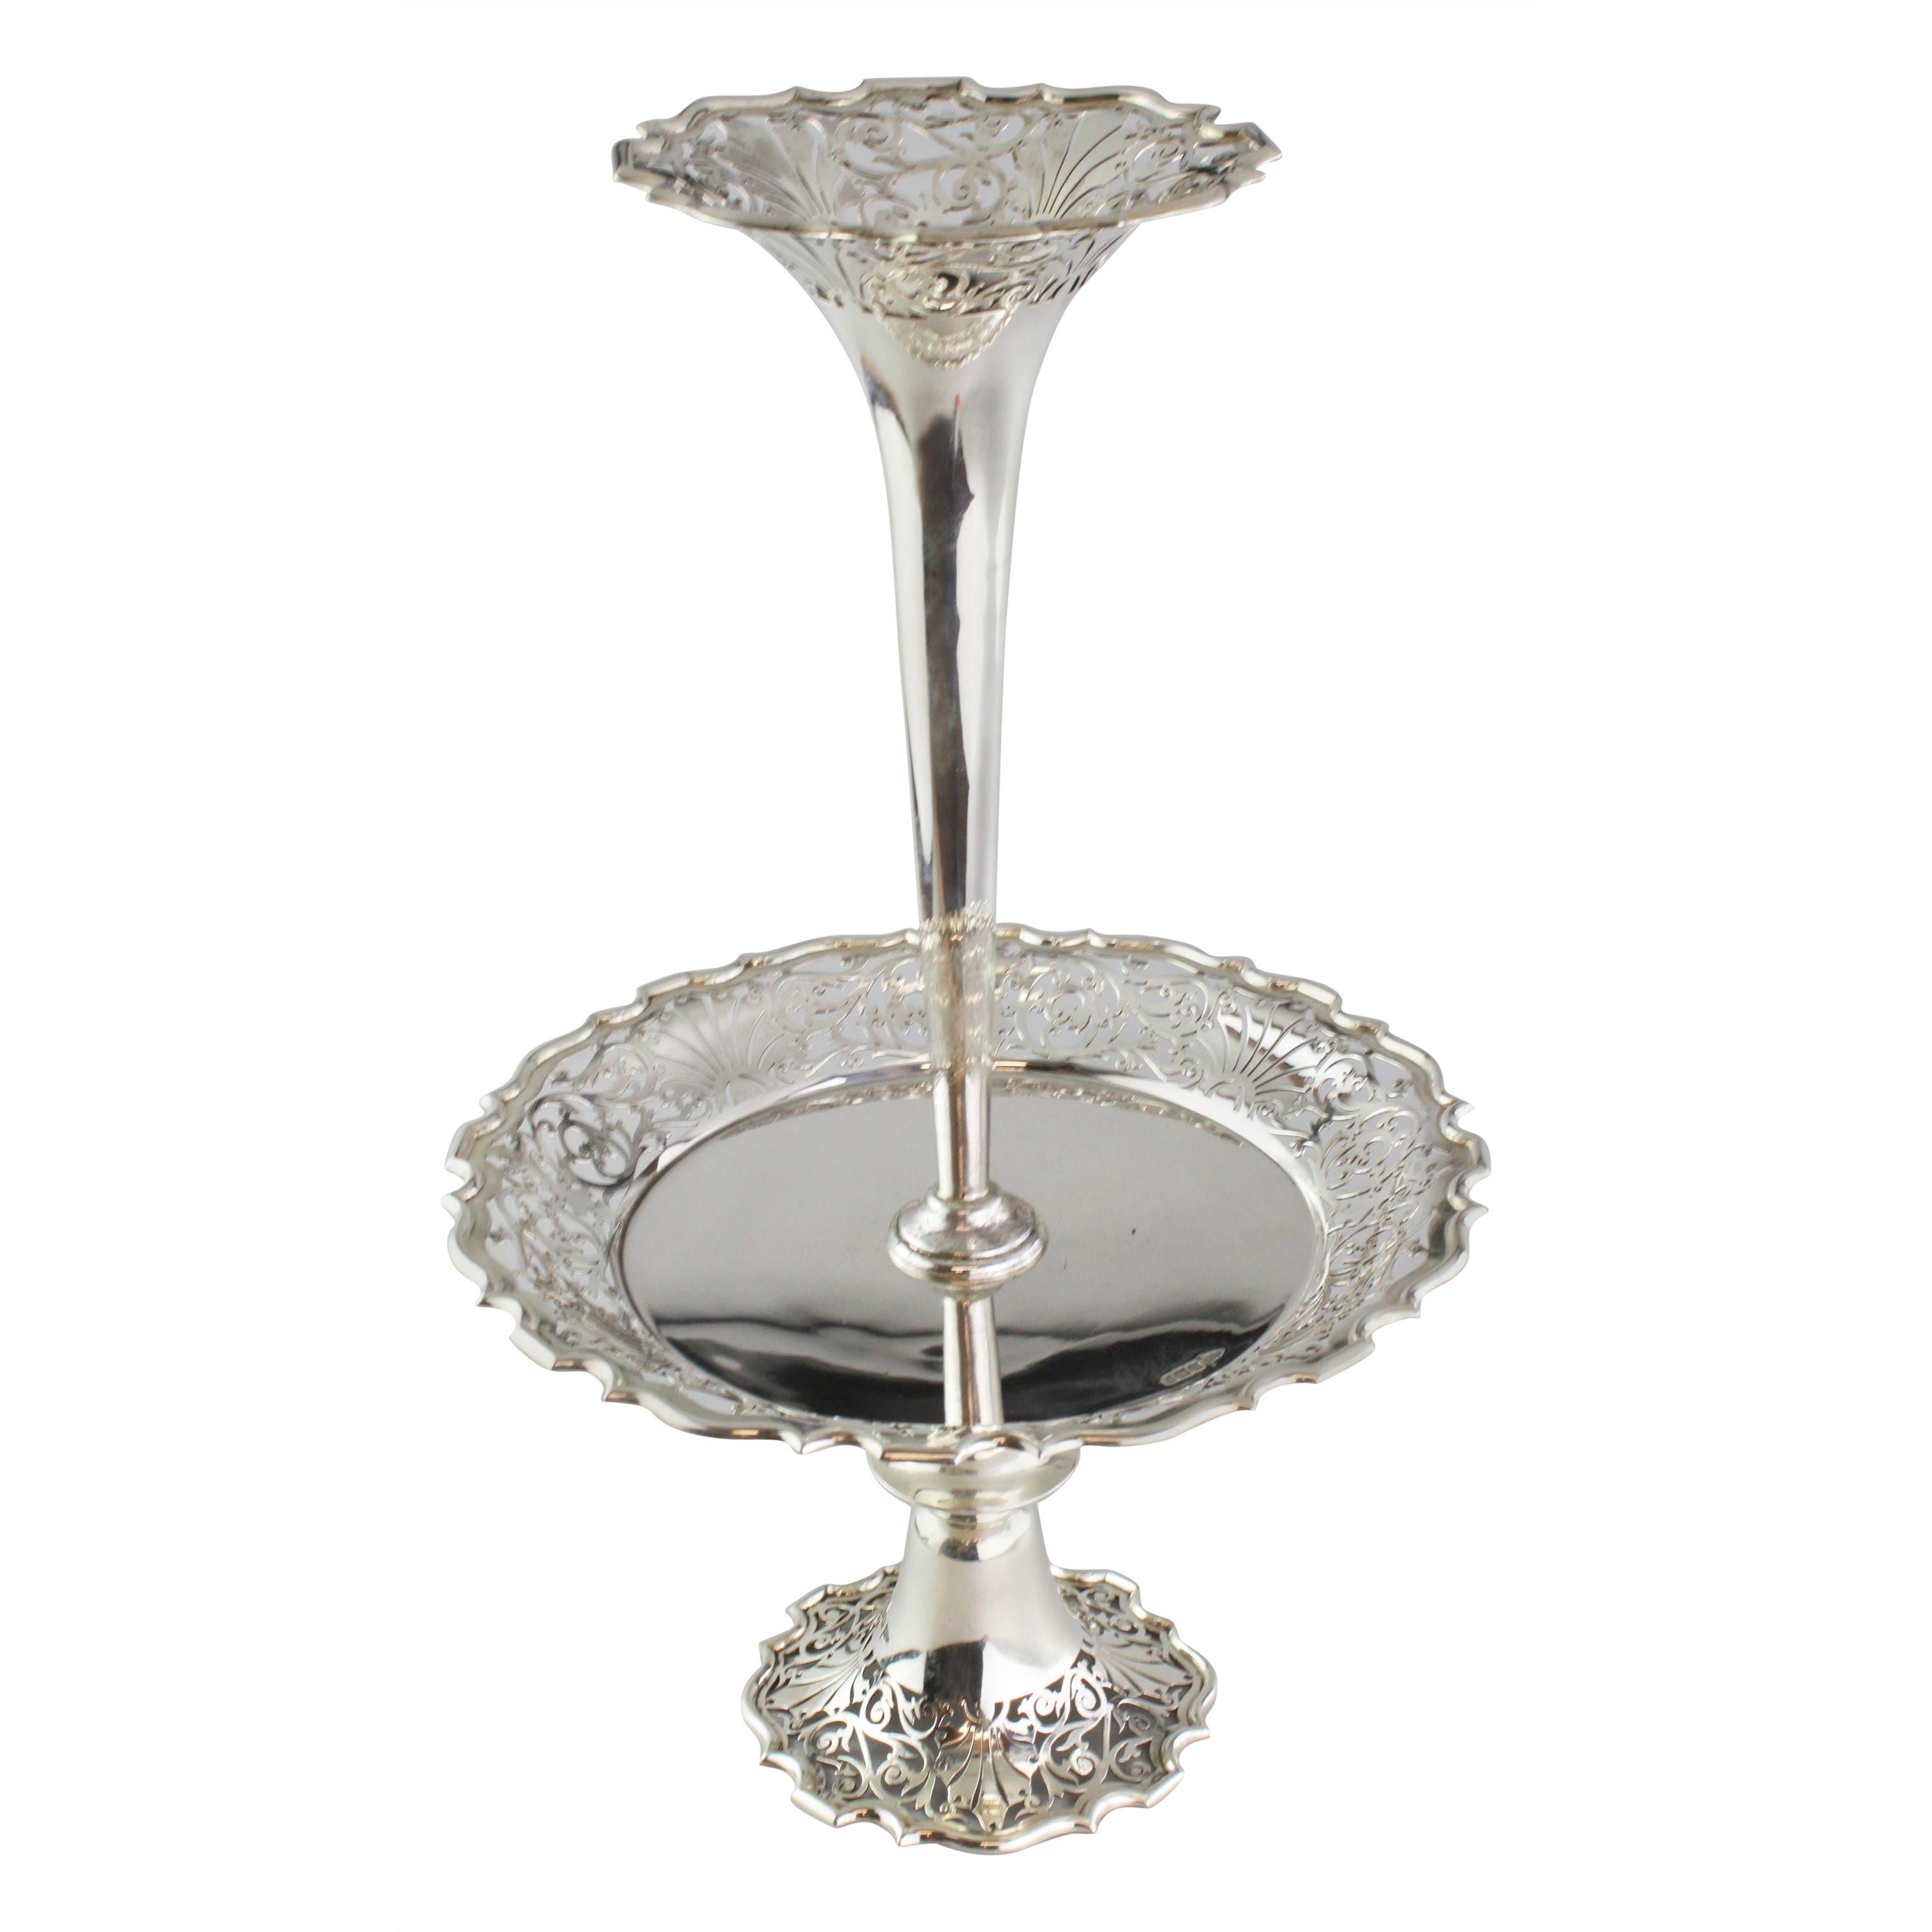 Antique Sterling Silver Tazza Dish with Vase, Walker & Hall, Sheffield, 1904